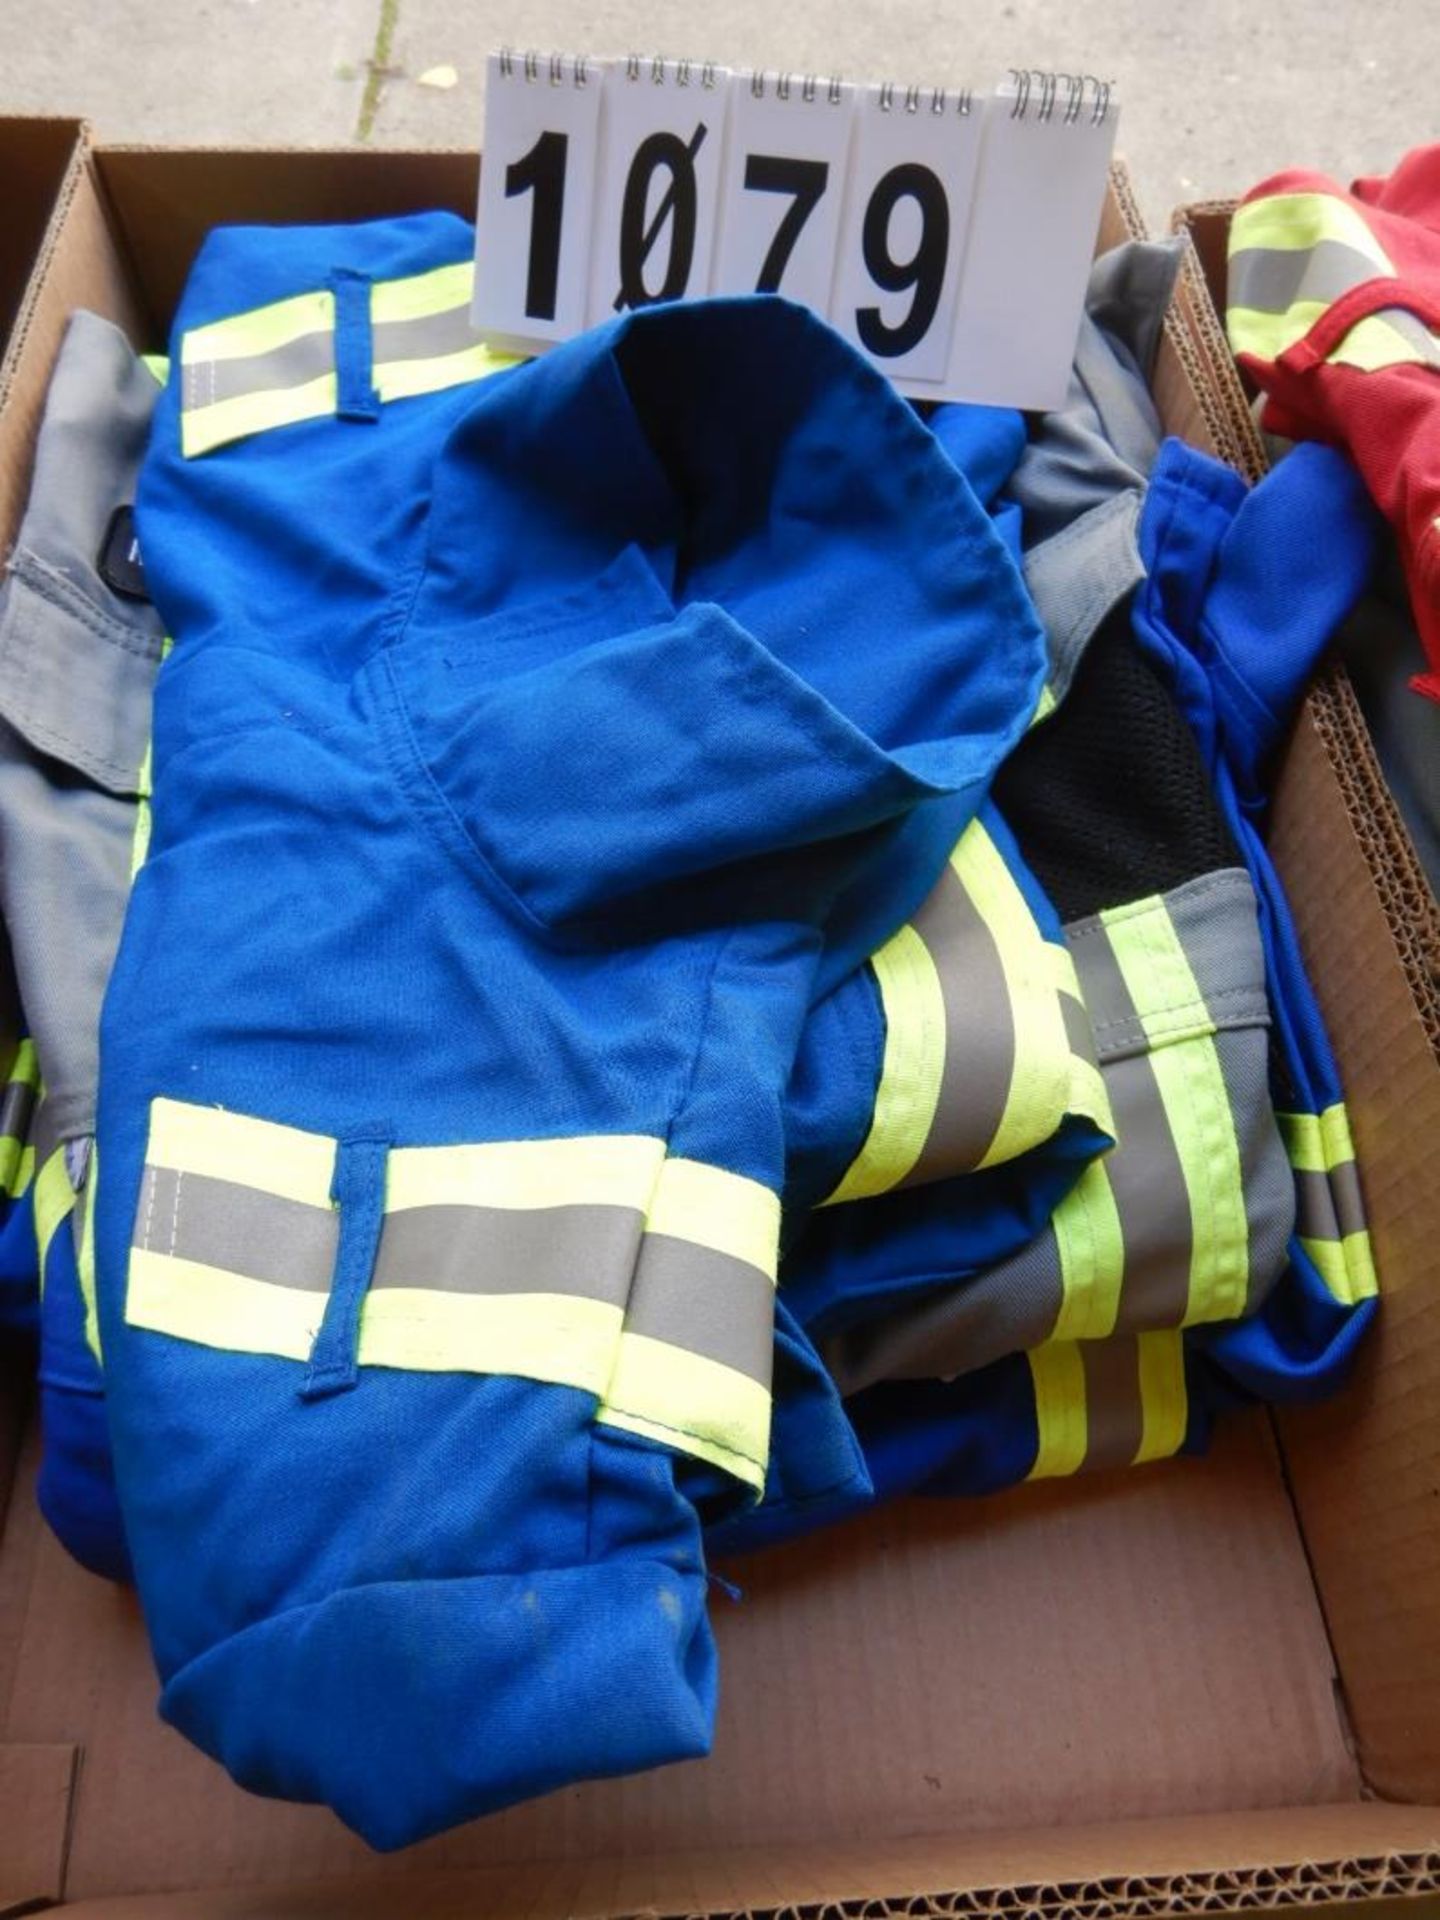 L/O 3-ASSORTED FR SAFETY COVERALLS, SIZE 48